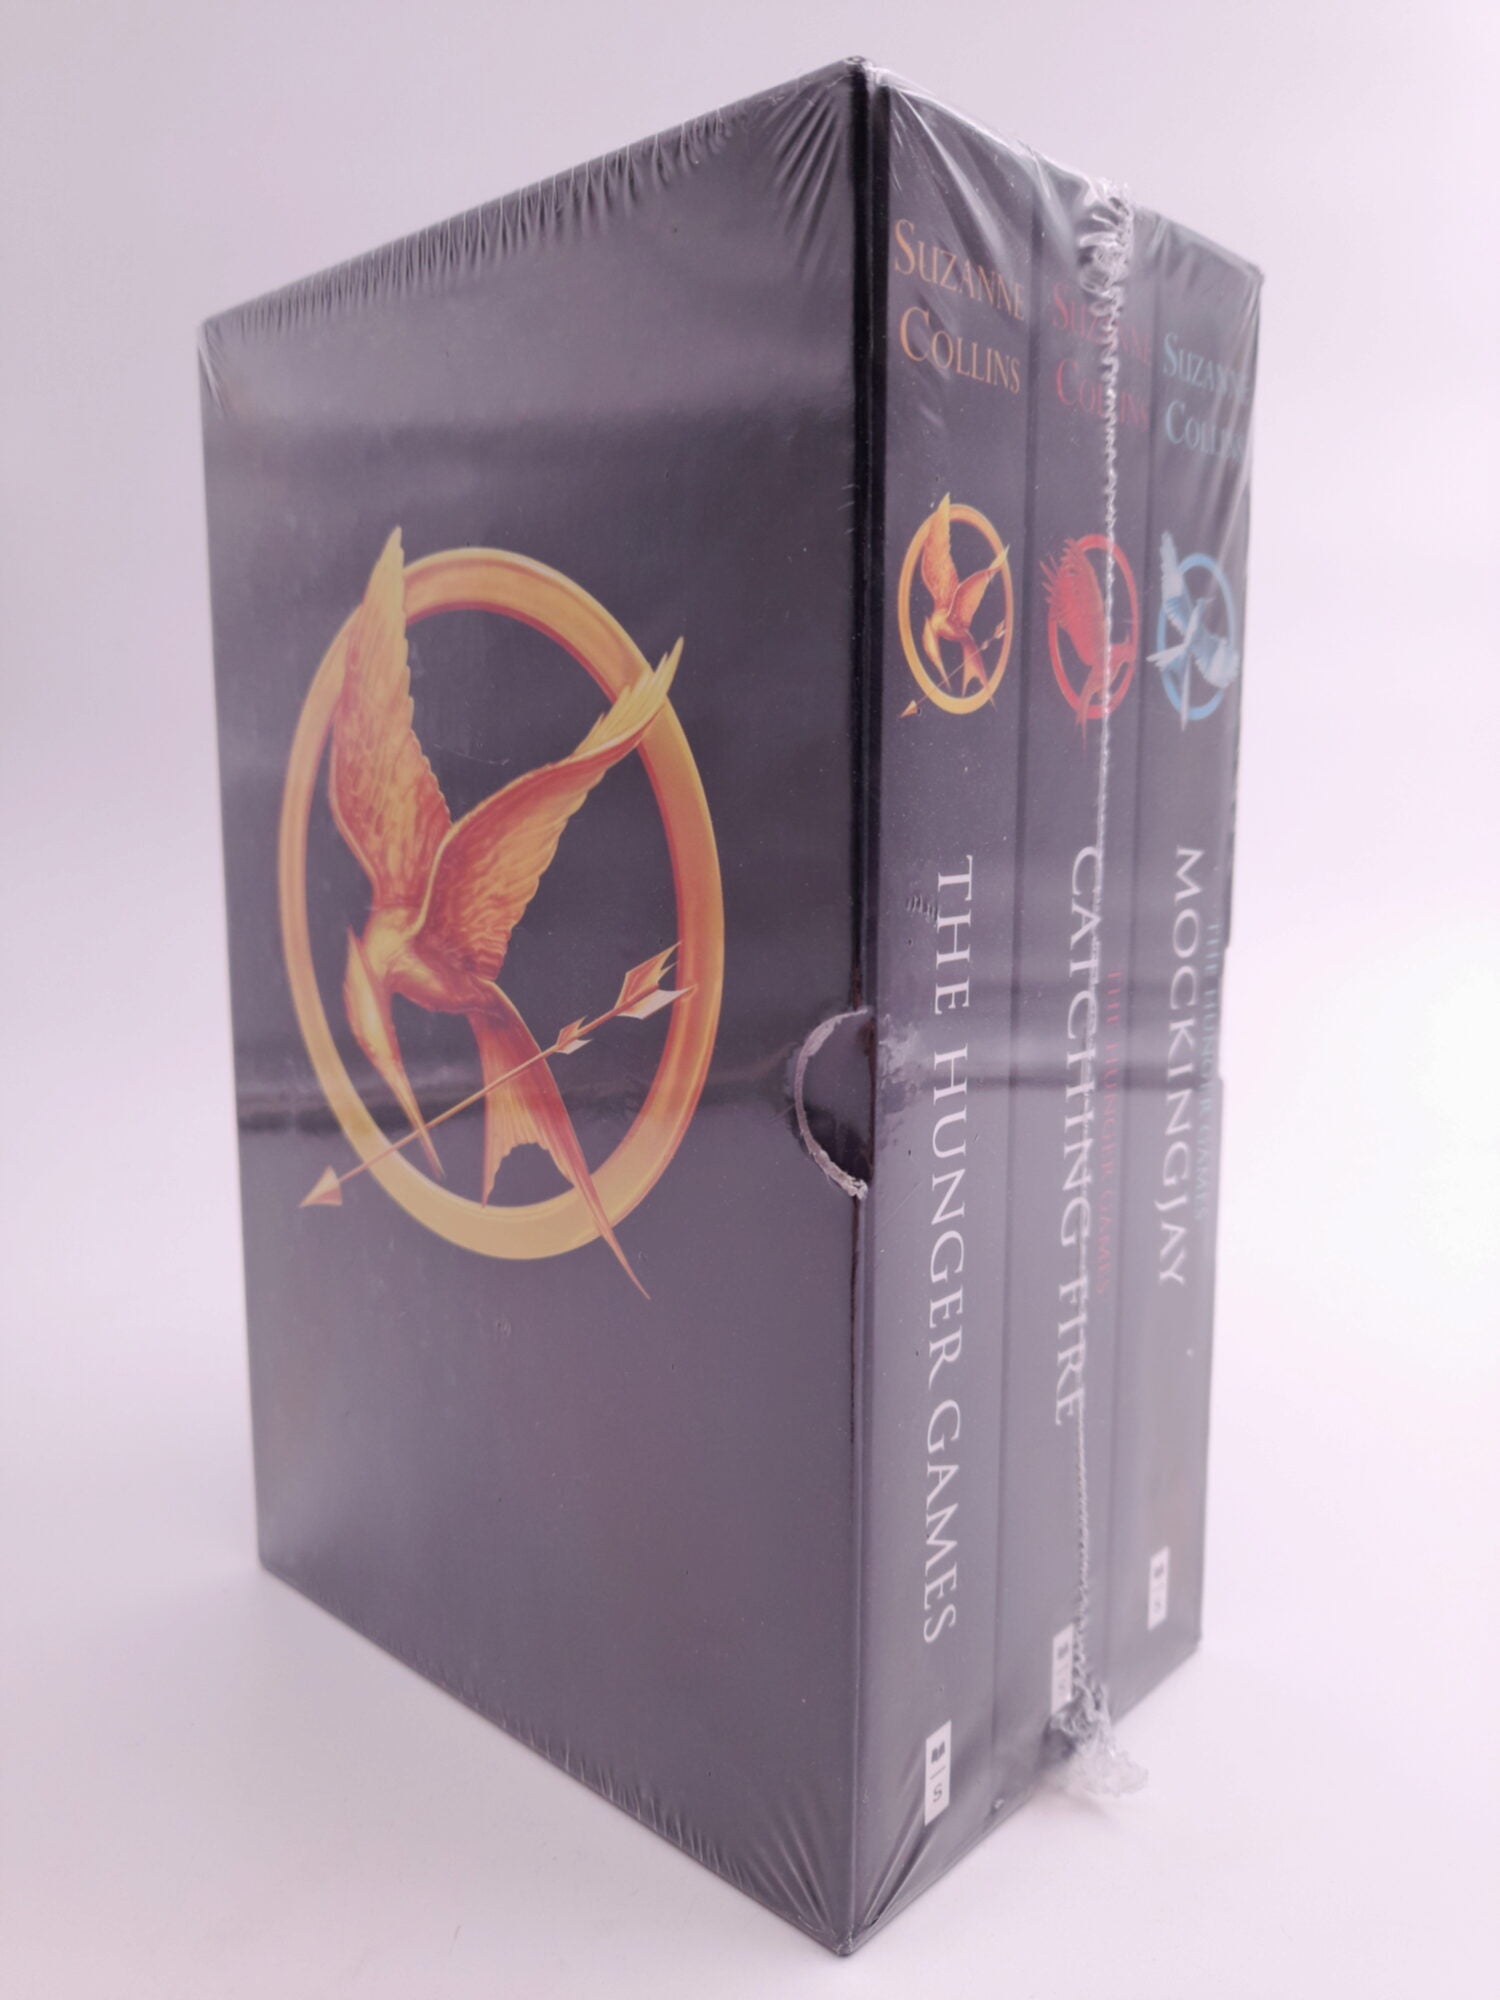 Collins, Suzanne | The Hunger Games Trilogy Classic Box Set